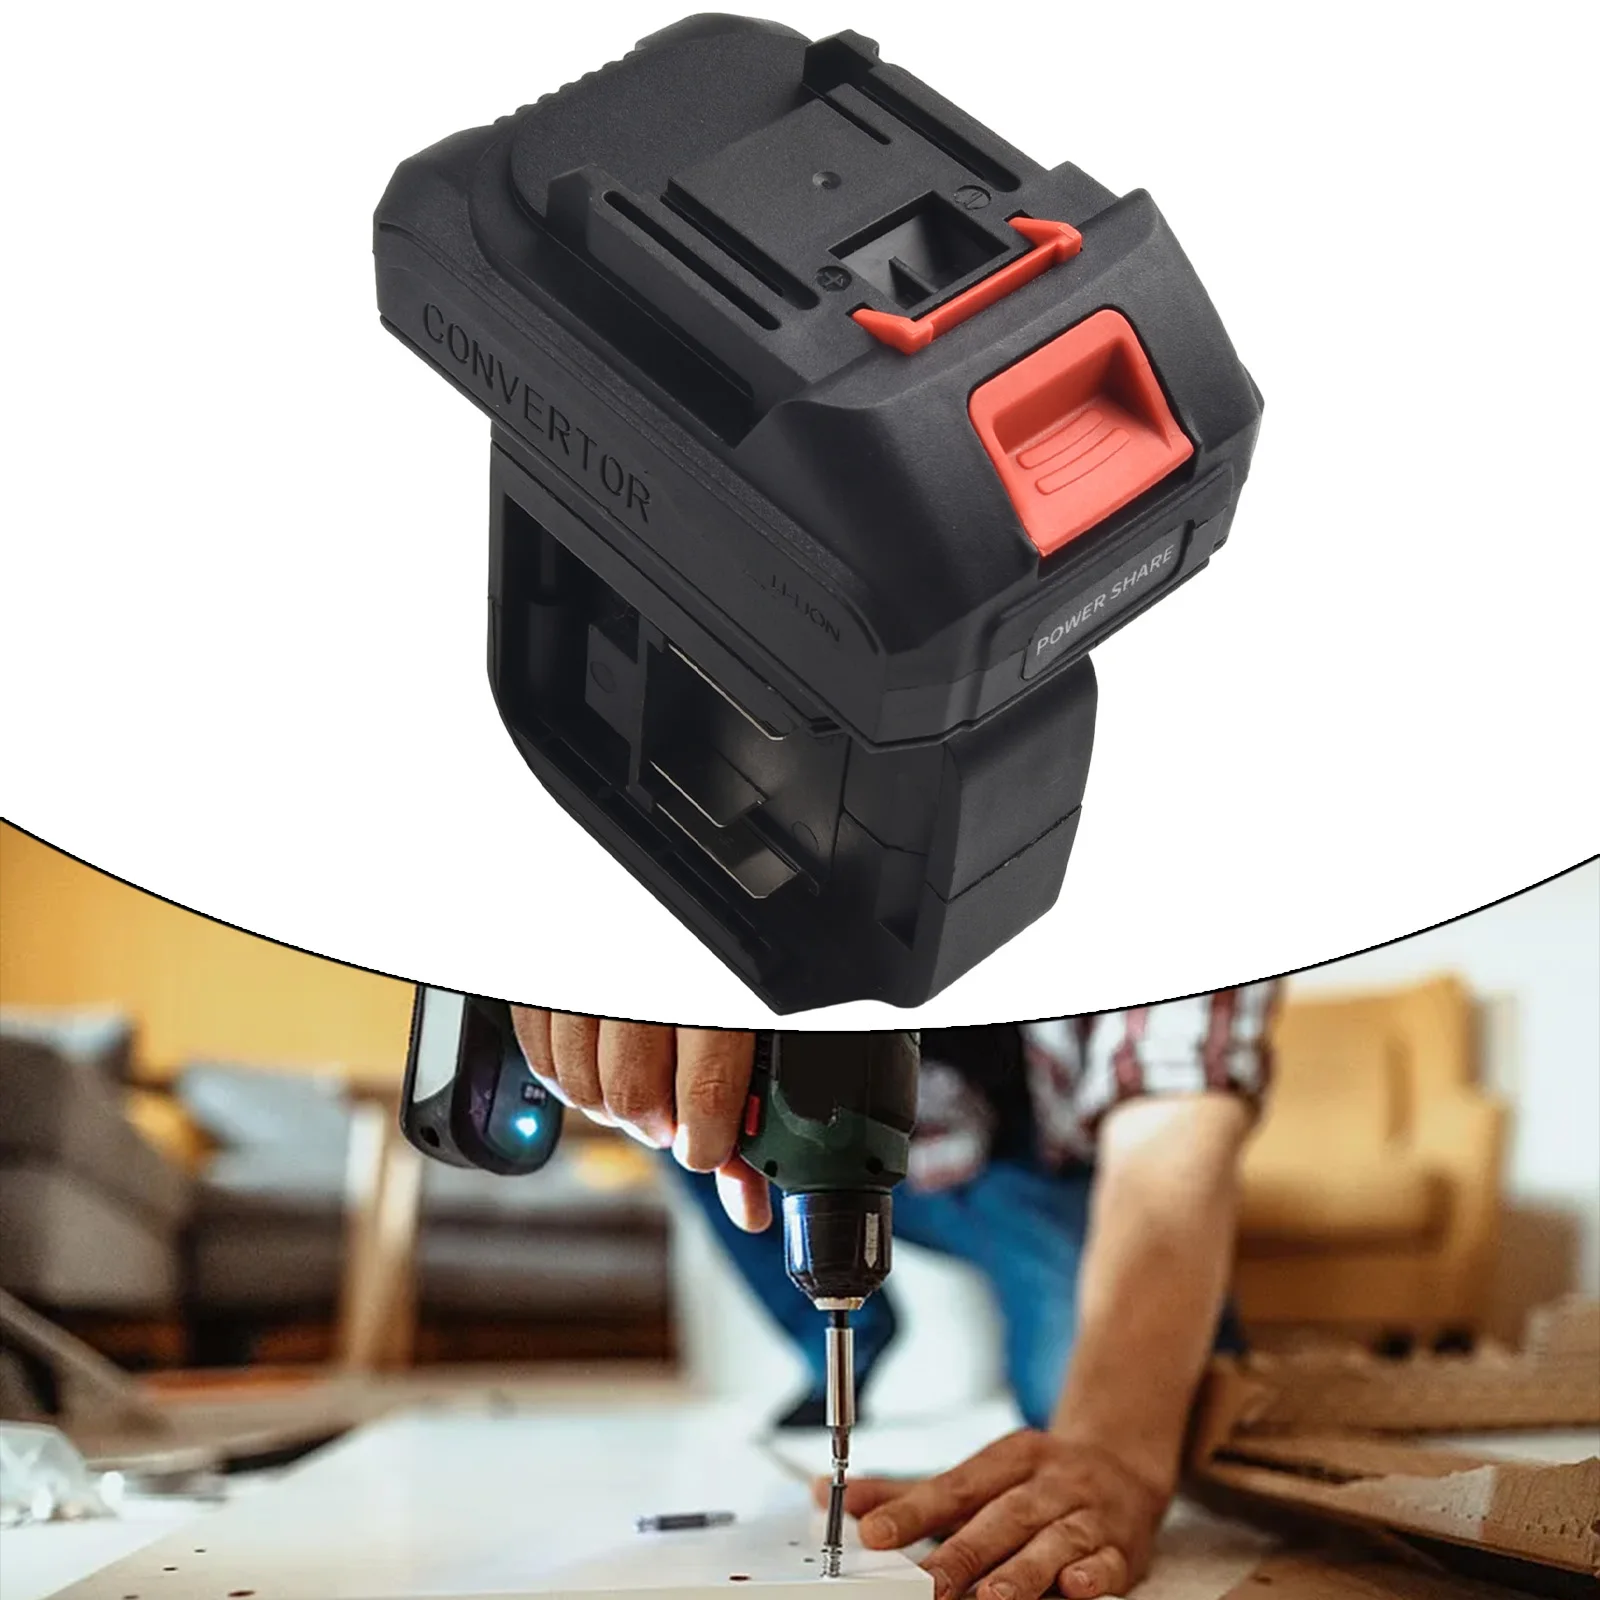 

Upgrade Your Workstation with our High Quality 2 in 1 Battery Converter for Makita Tools Get Ready for Unmatched Power